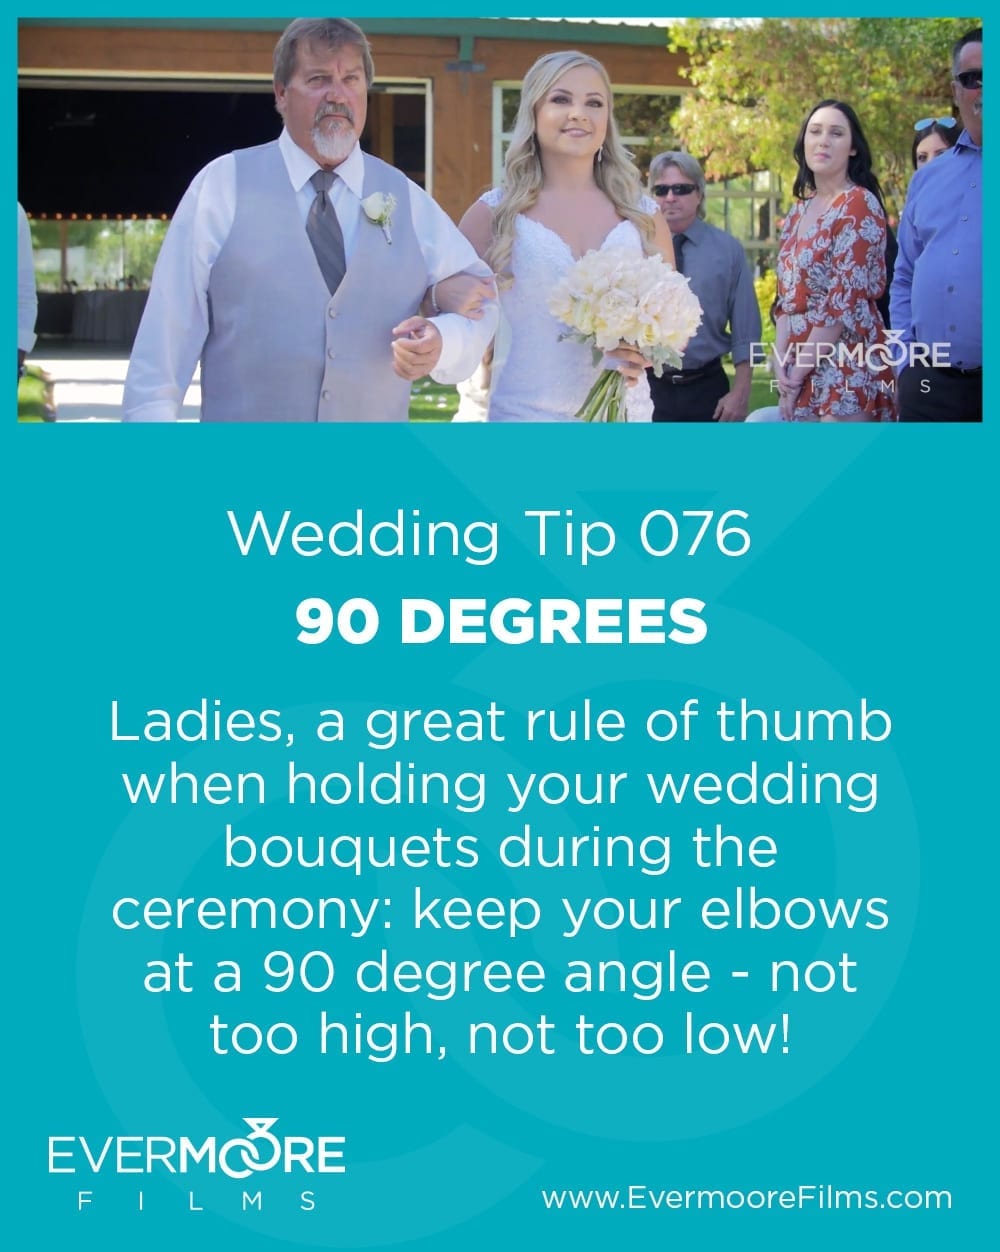 The 90 degree rule for wedding bouquets - make sure your flowers don't hide your dress! | www.EvermooreFilms.com